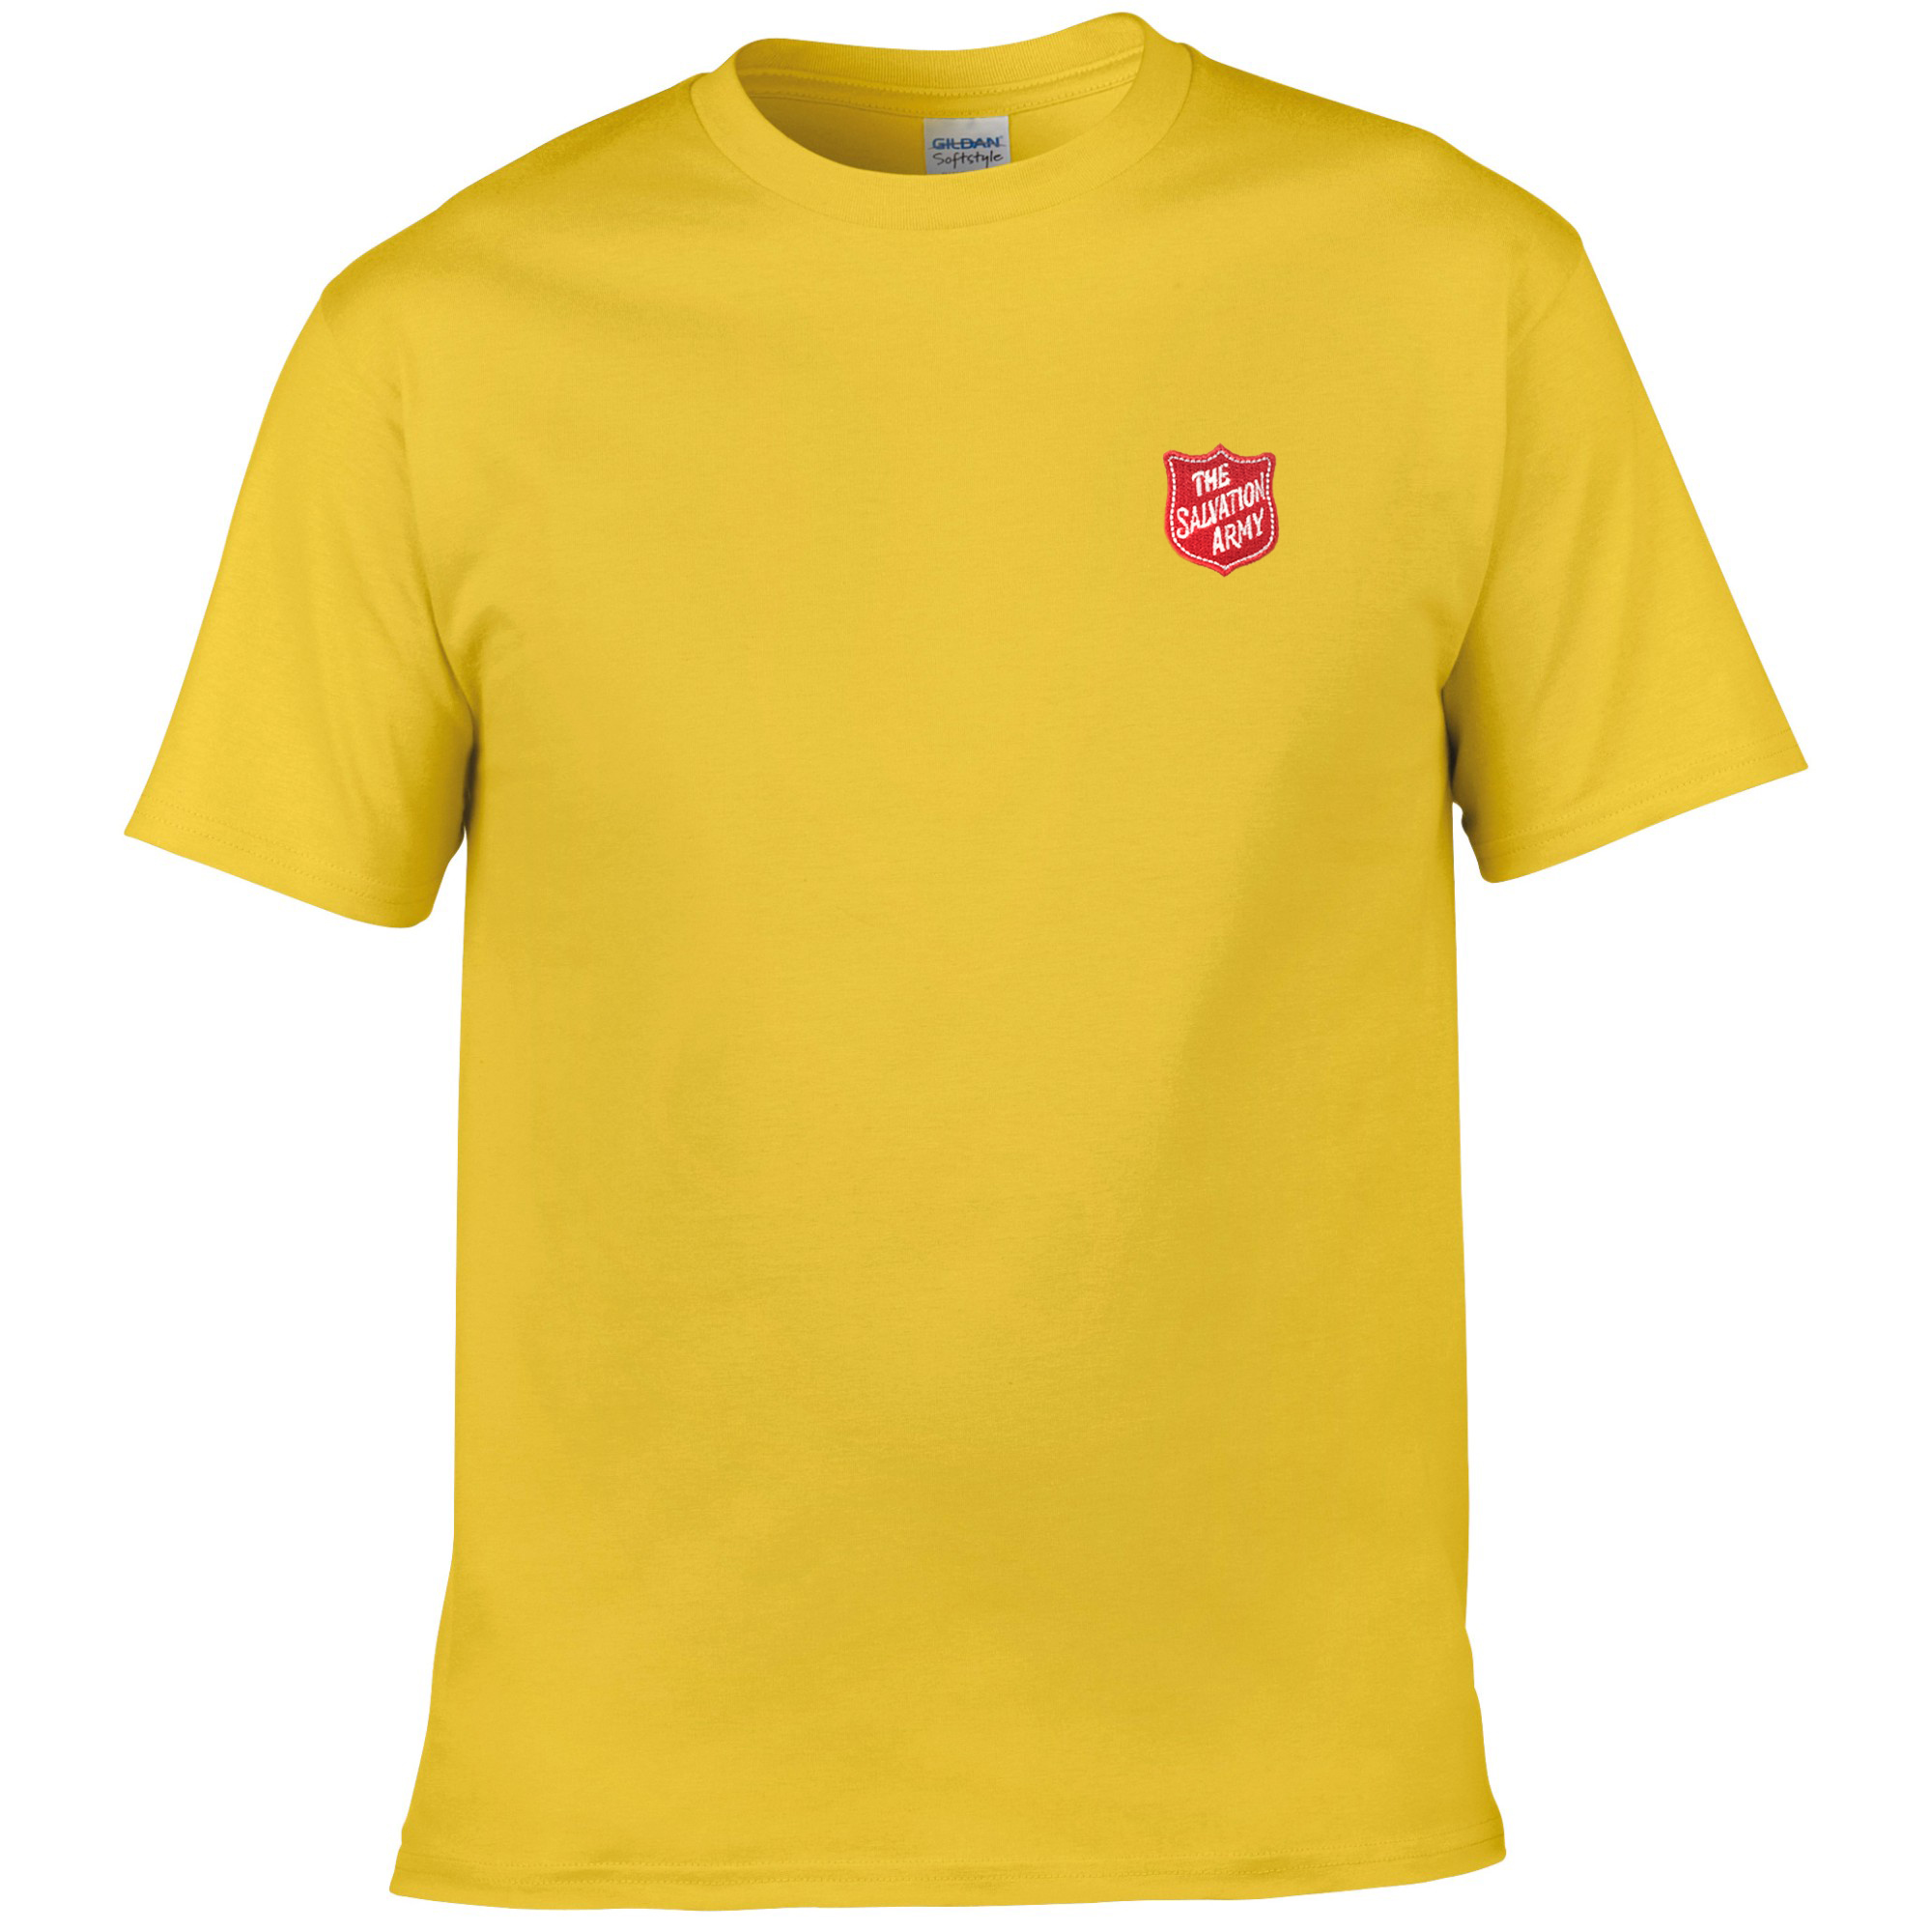 Essentials T Shirt - Yellow with Shield